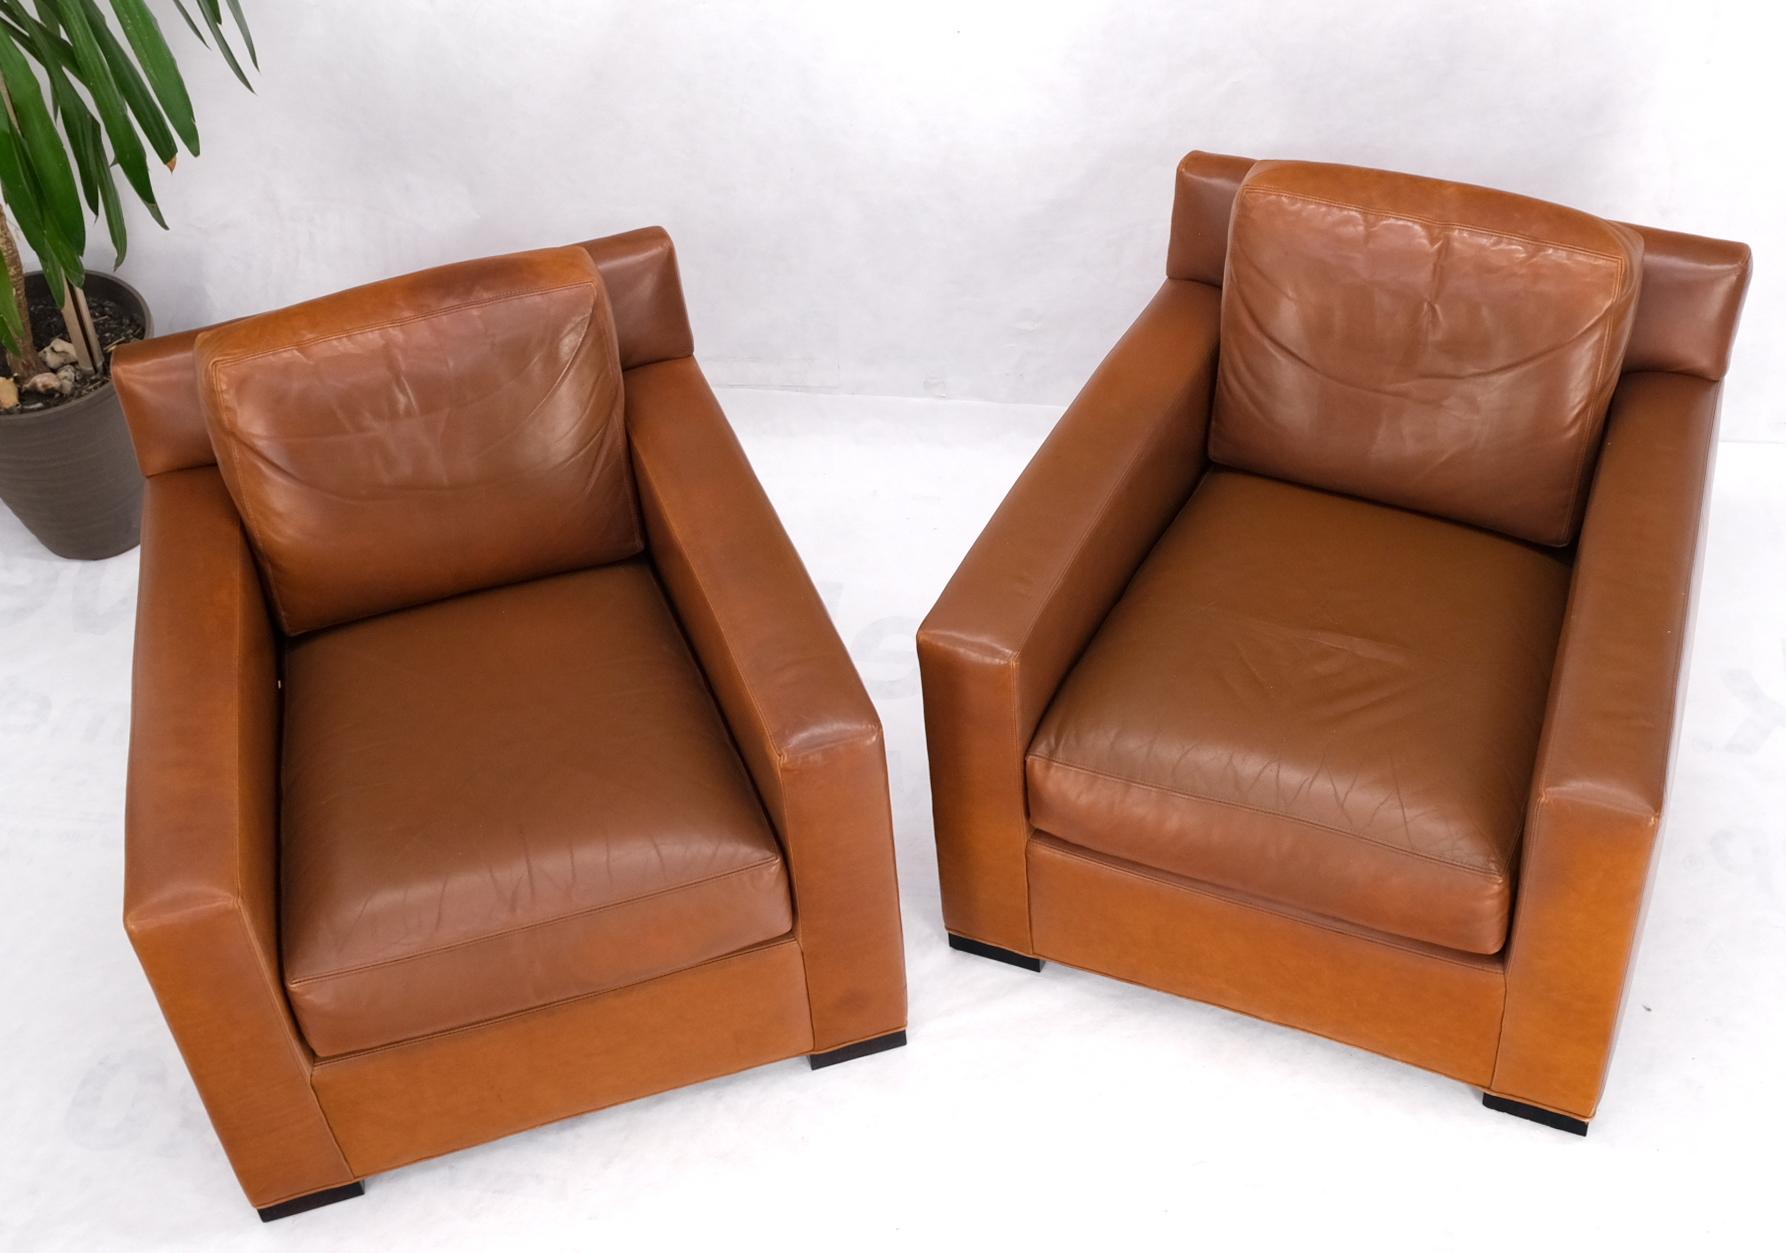 Pair of Brown Tan Leather Lounge Chairs by Coach In Good Condition For Sale In Rockaway, NJ